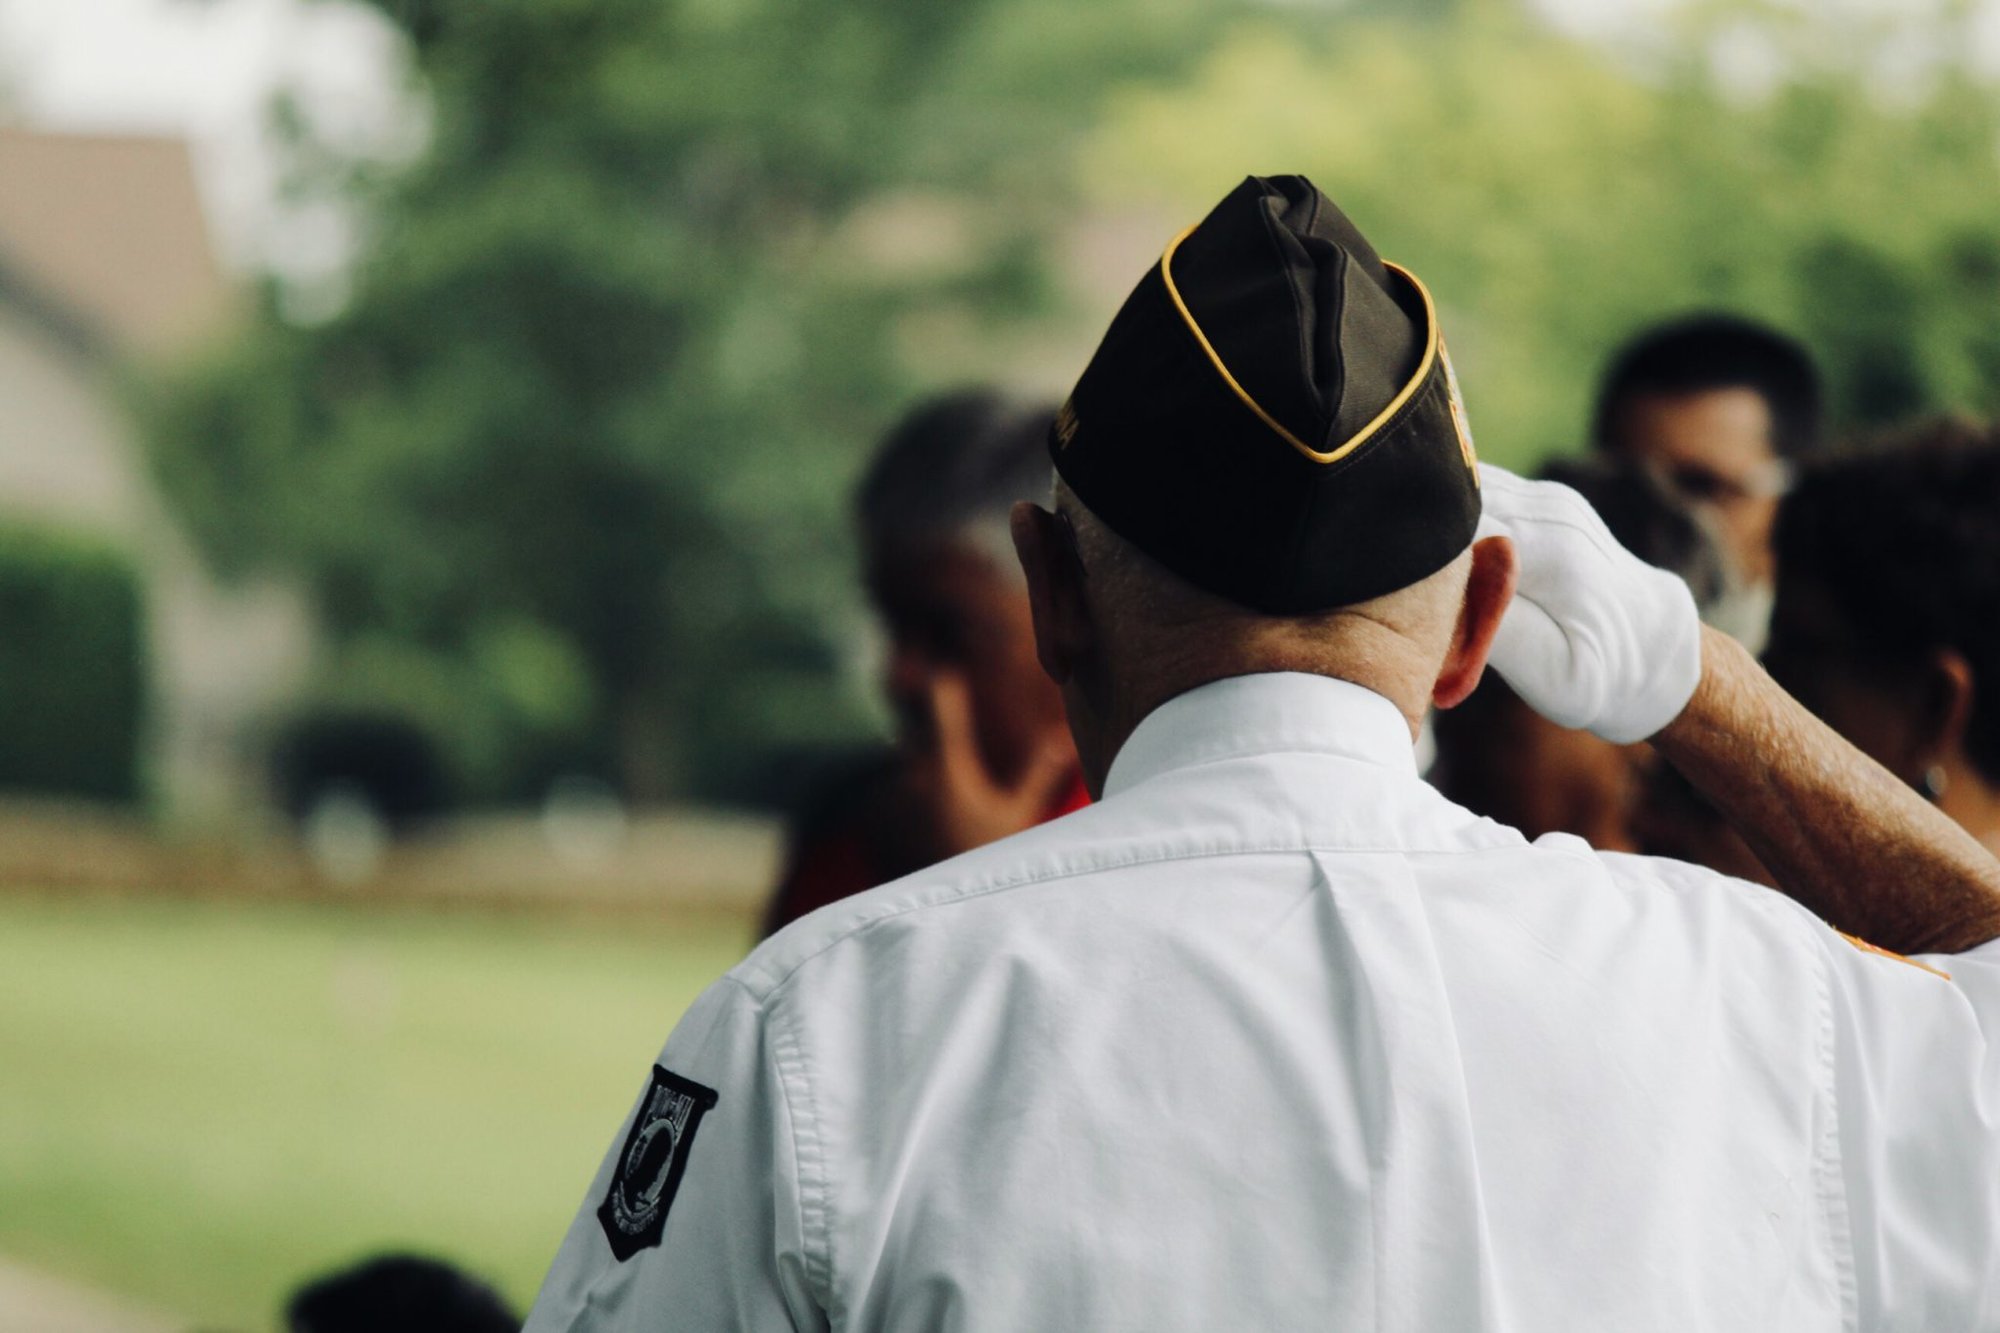 Veterans already saw a 5.9% increase in benefits payments in December 2021 — the largest raise since the early 1980s — and are on their way to another significant boost this year, if inflation doesn’t slow down. Photo by sydney Rae on Unsplash.